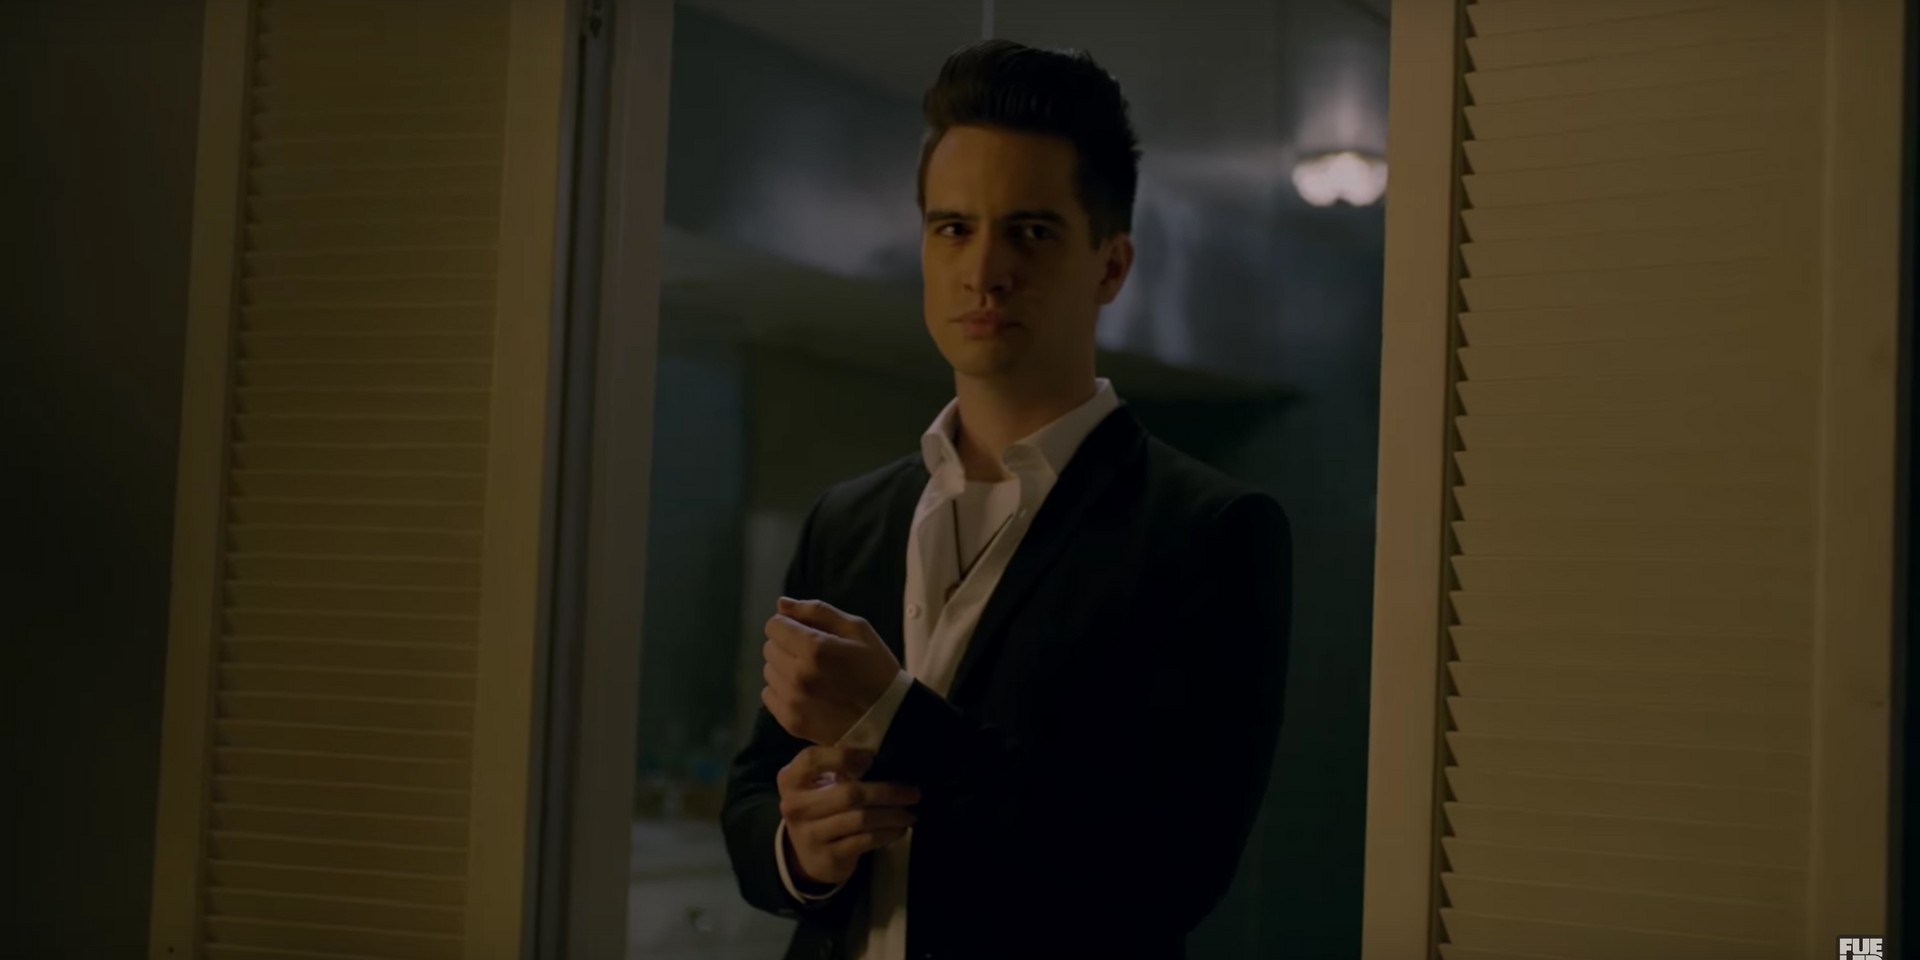 Panic! at the Disco drop new music, including video for 'Say Amen (Saturday Night)' – watch